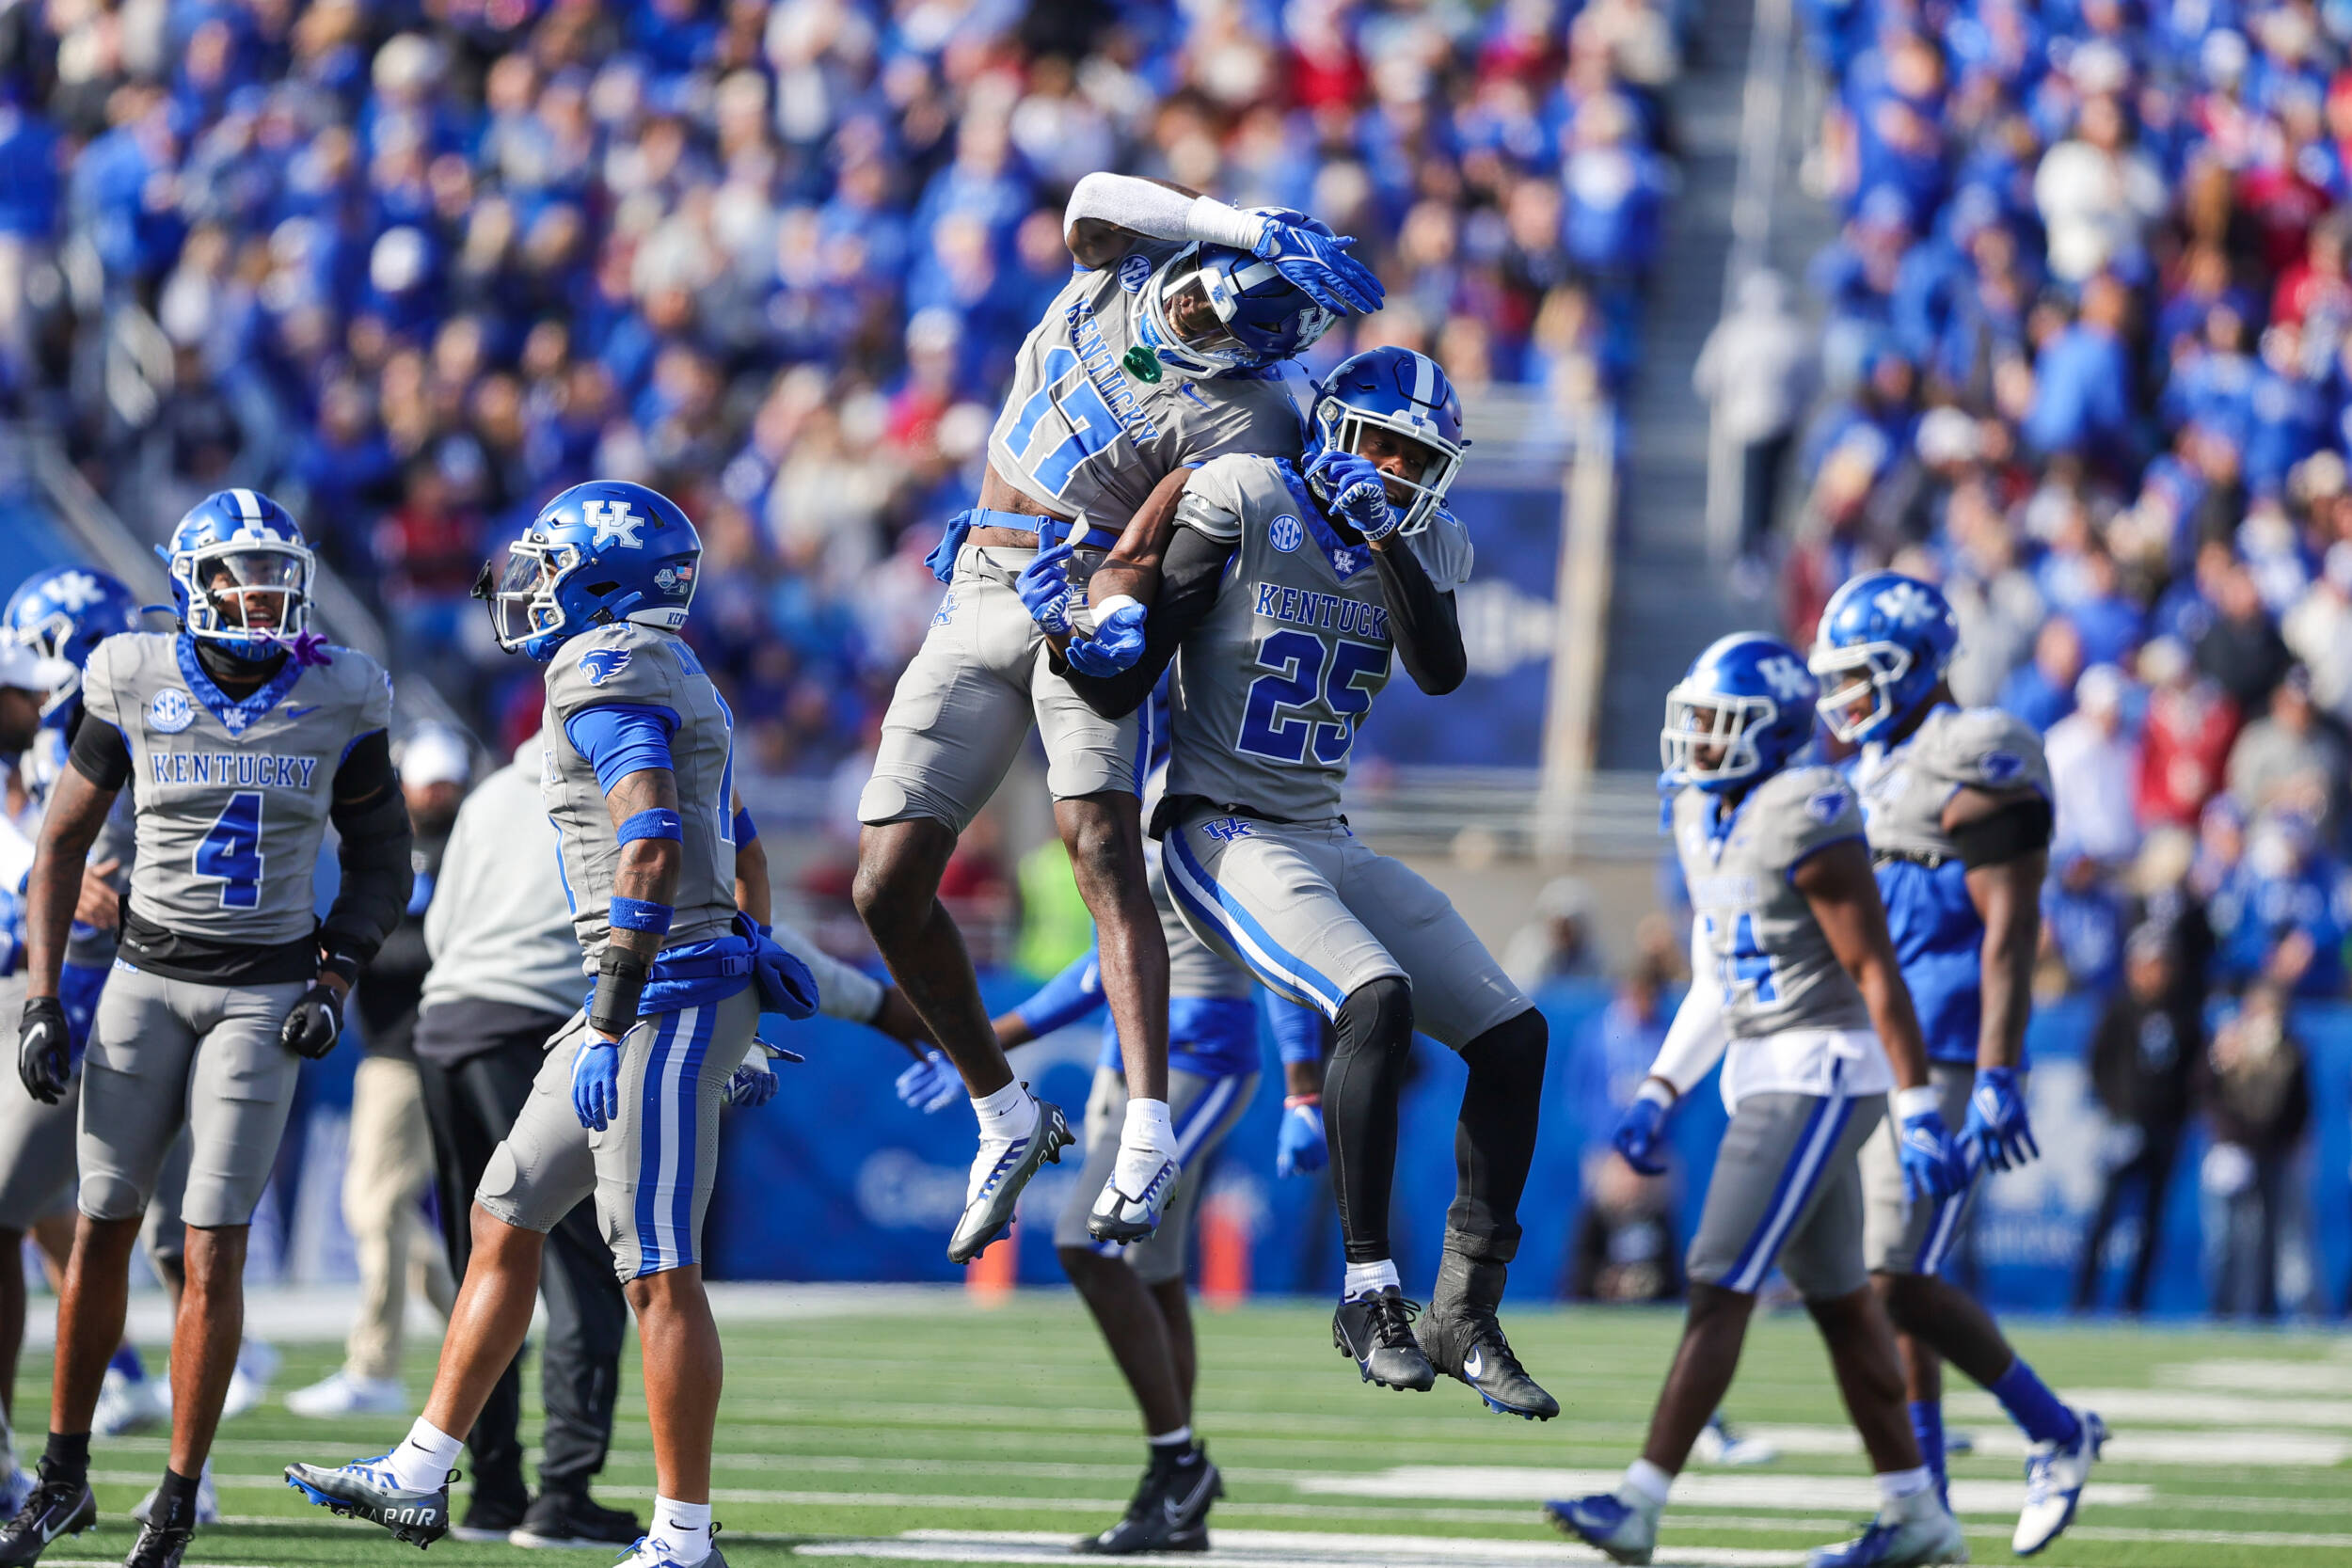 Game Day Central: Kentucky at Louisville – UK Athletics